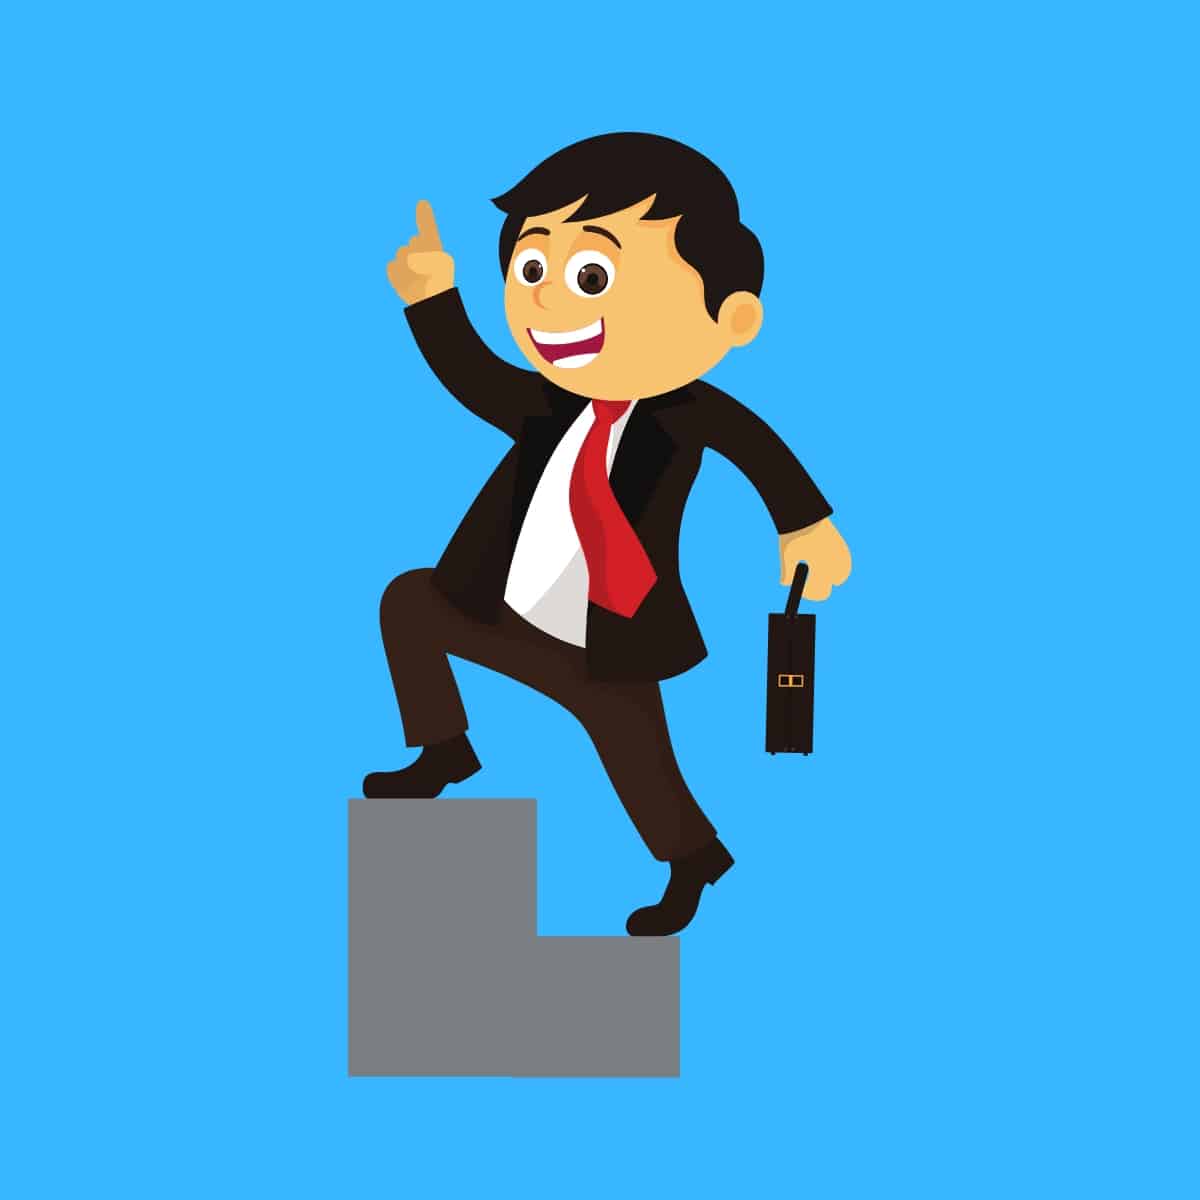 Cartoon graphic of a business man walking up stairs smiling with one finger pointing up on a blue background.